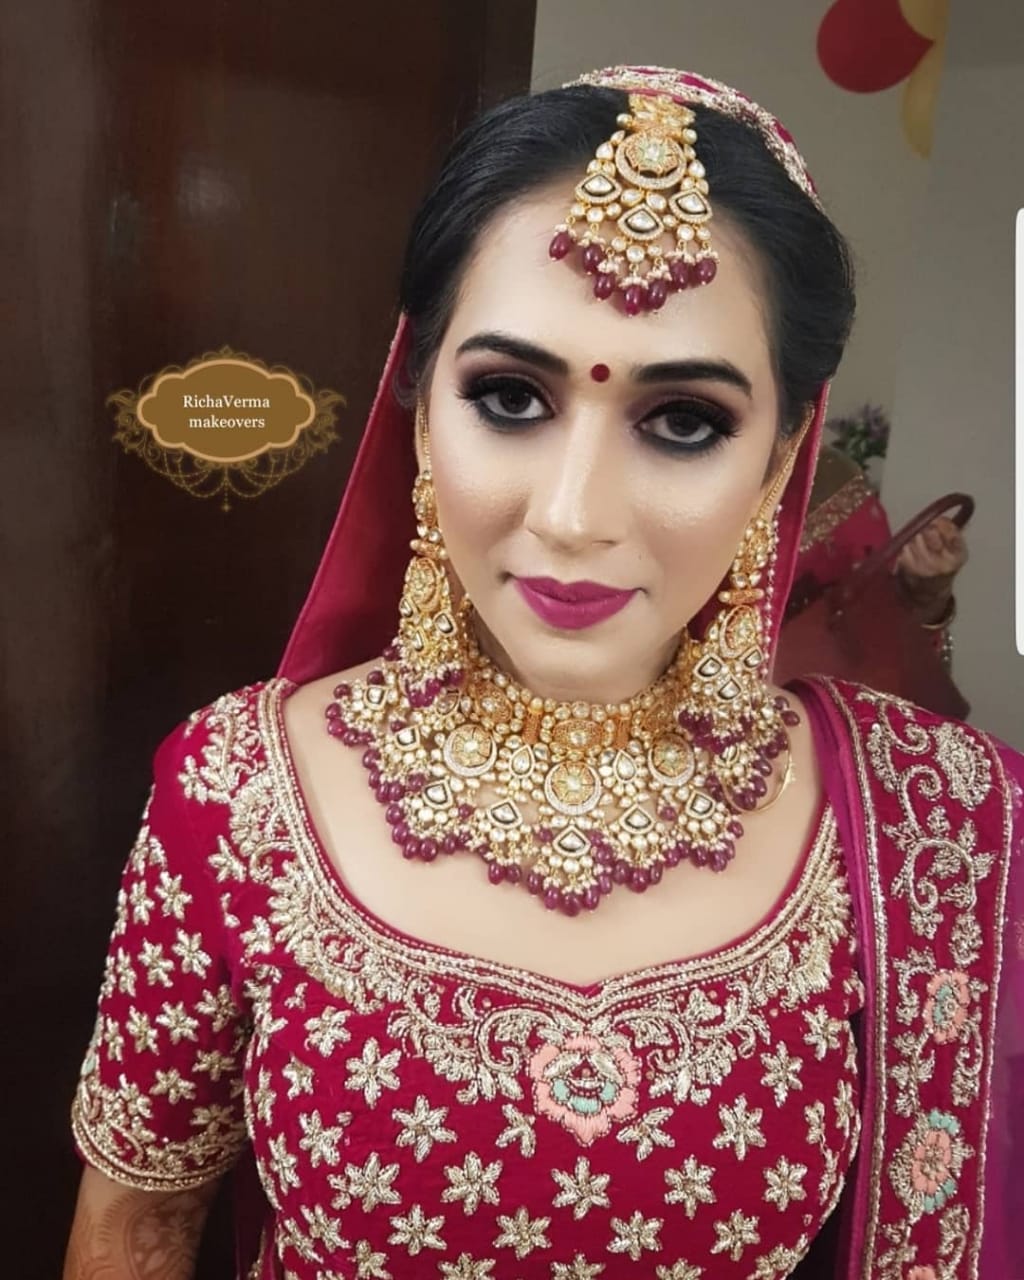 Richa Verma Makeup Artist Services, Review and Info - Olready